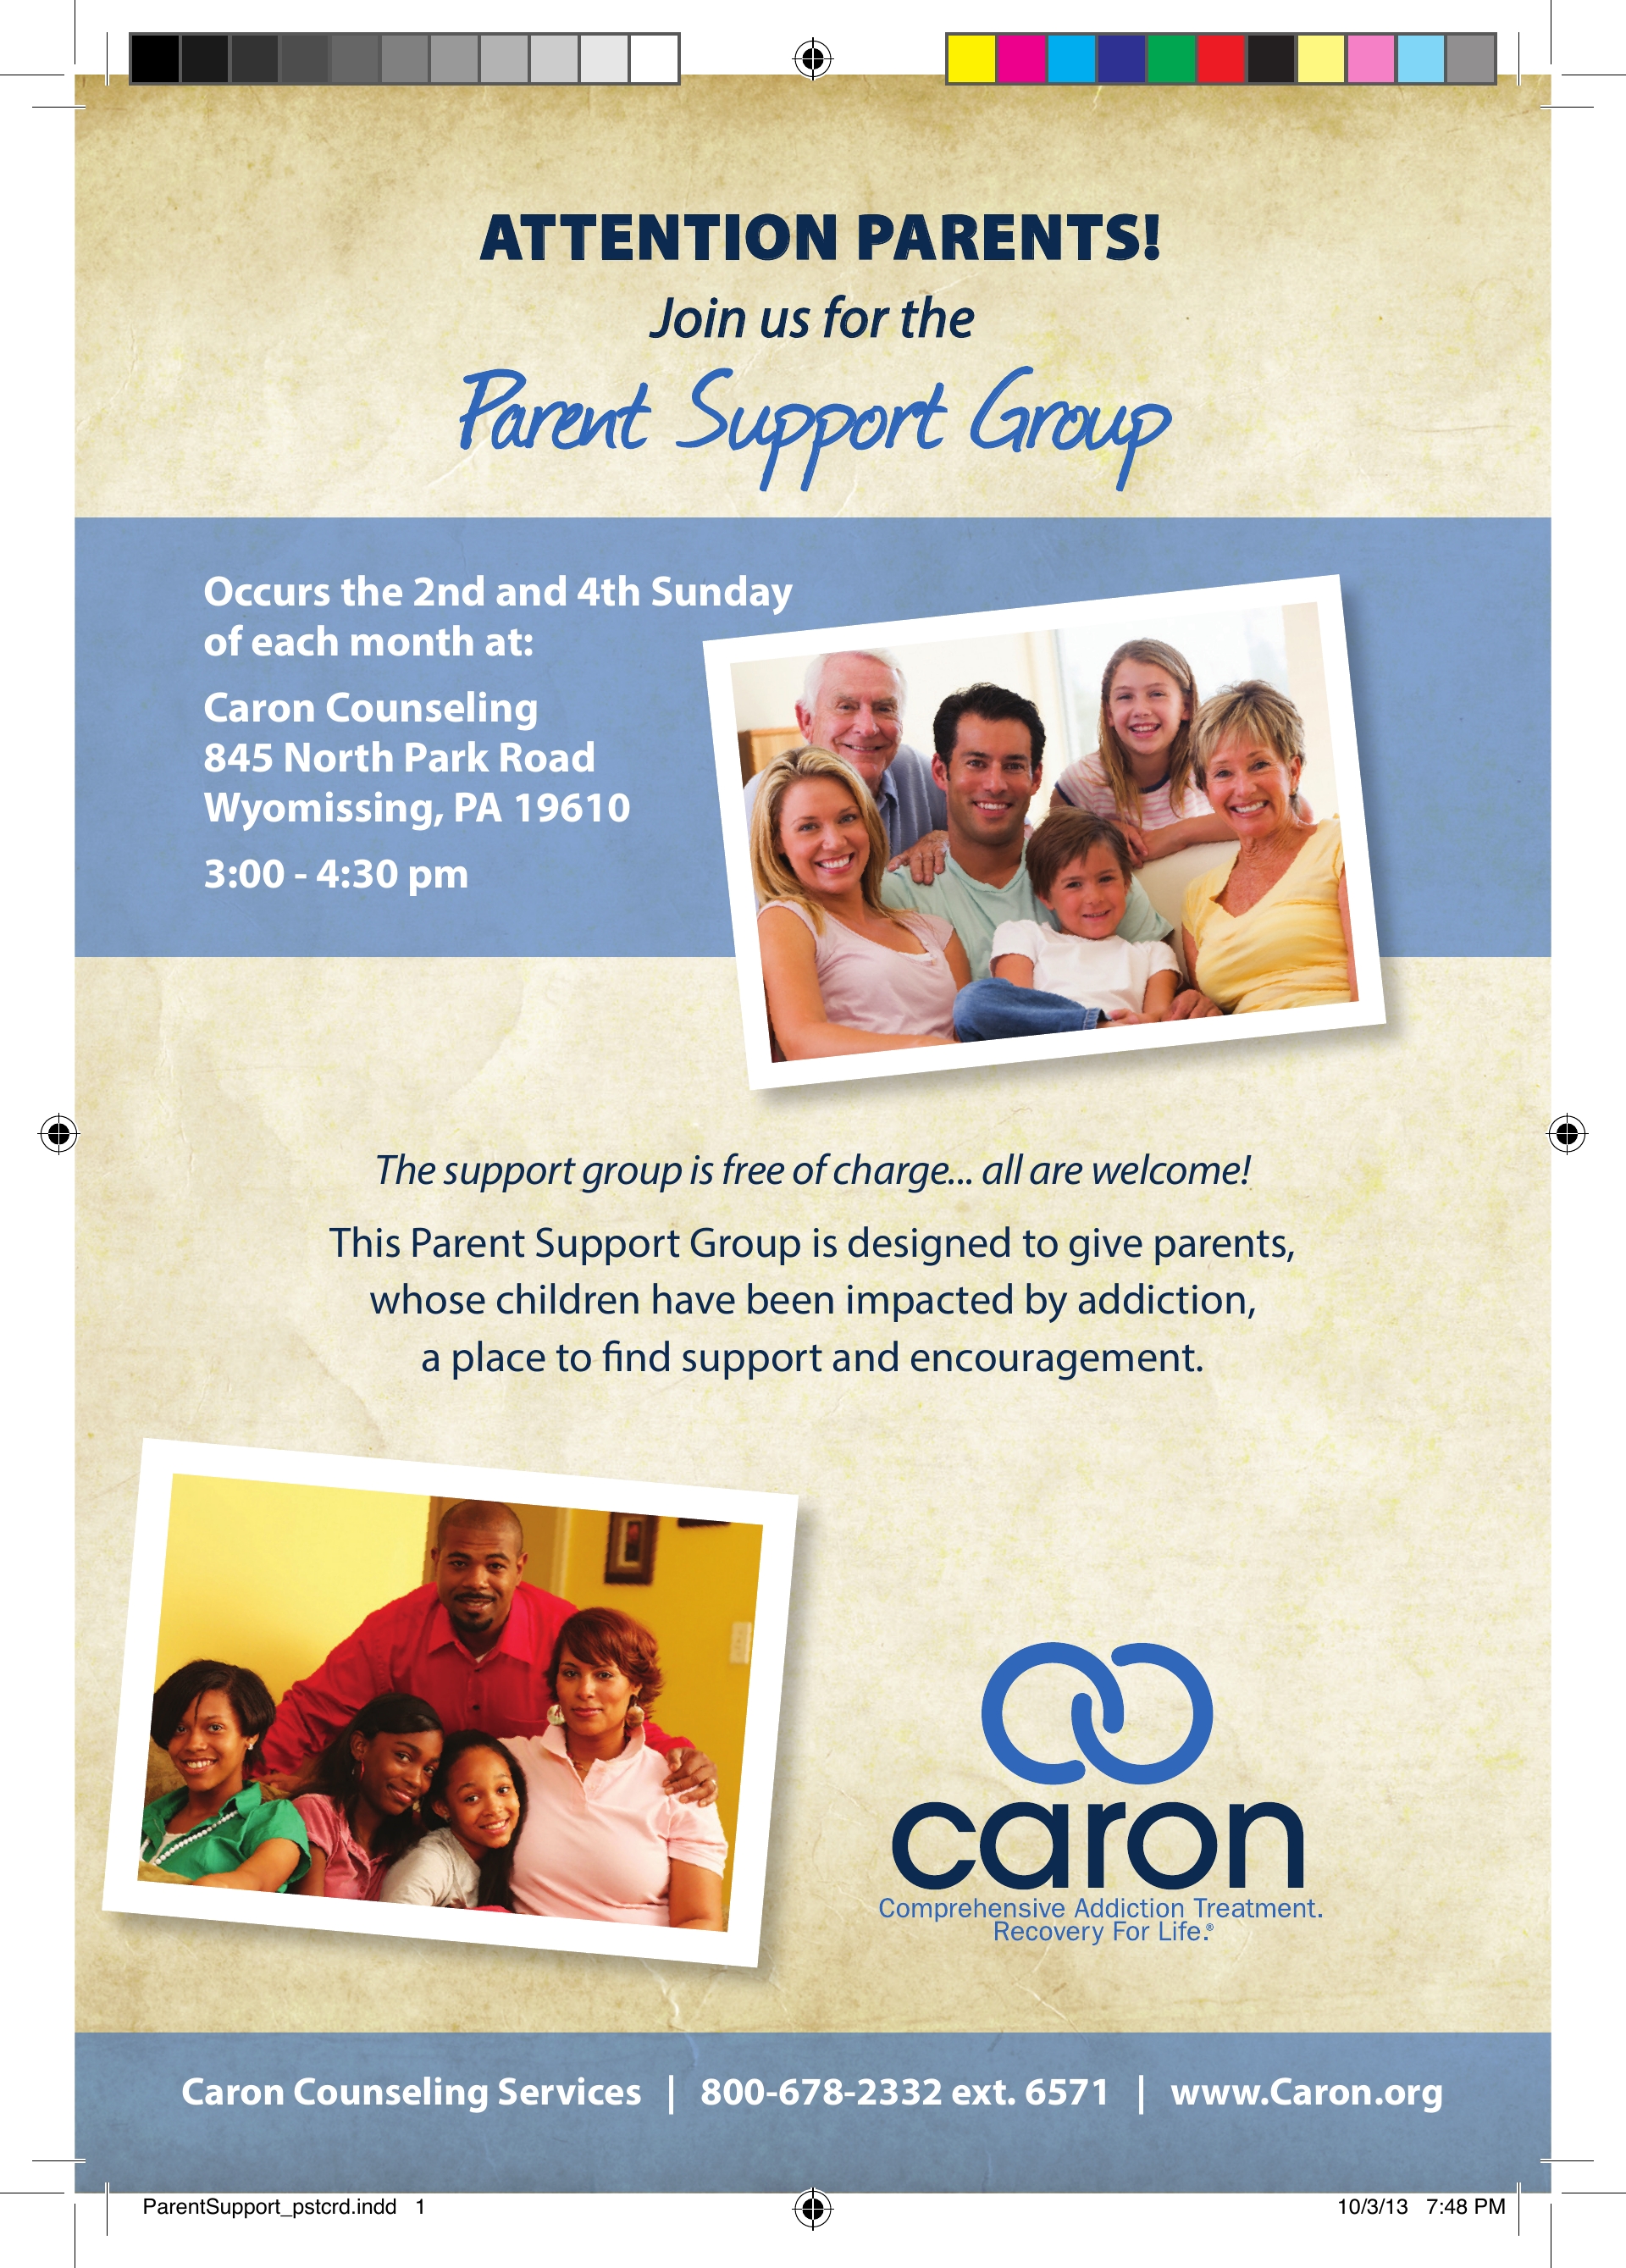 PARENT SUPPORT GROUP for those who have children impacted by addiction